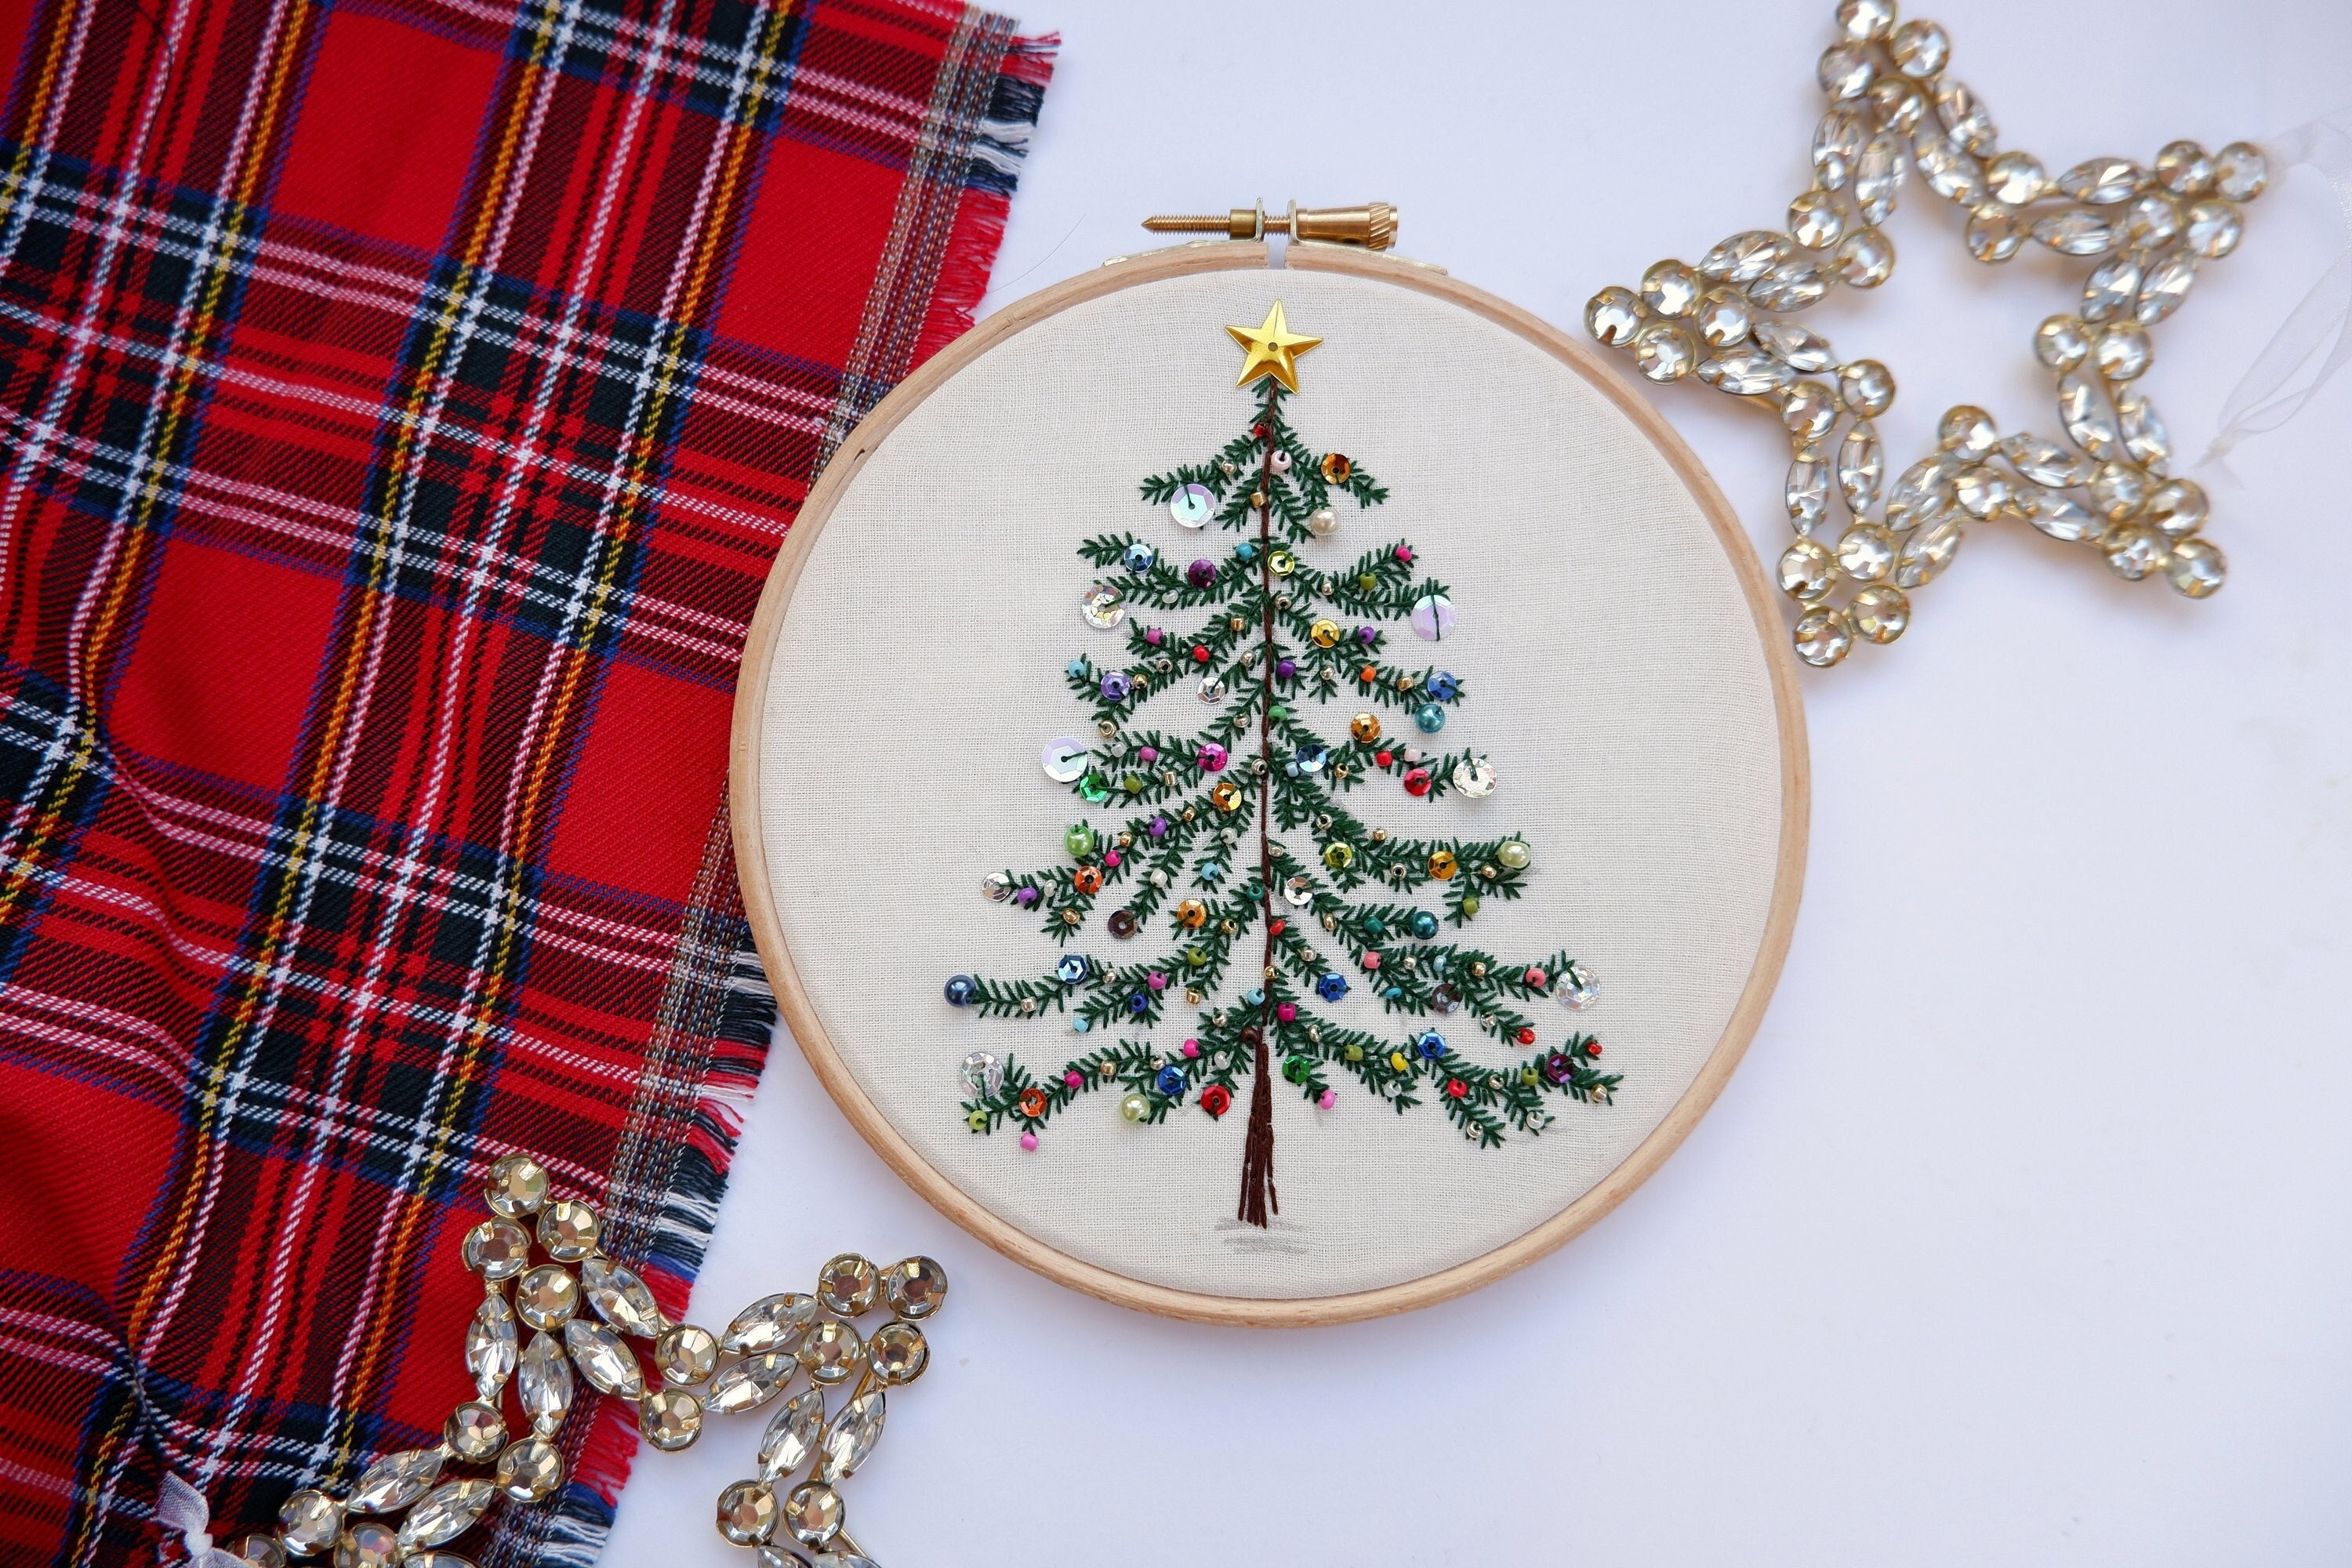 FO] I tried making Christmas ornaments for my family this year and thought  I'd share. They were a hit! : r/CrossStitch